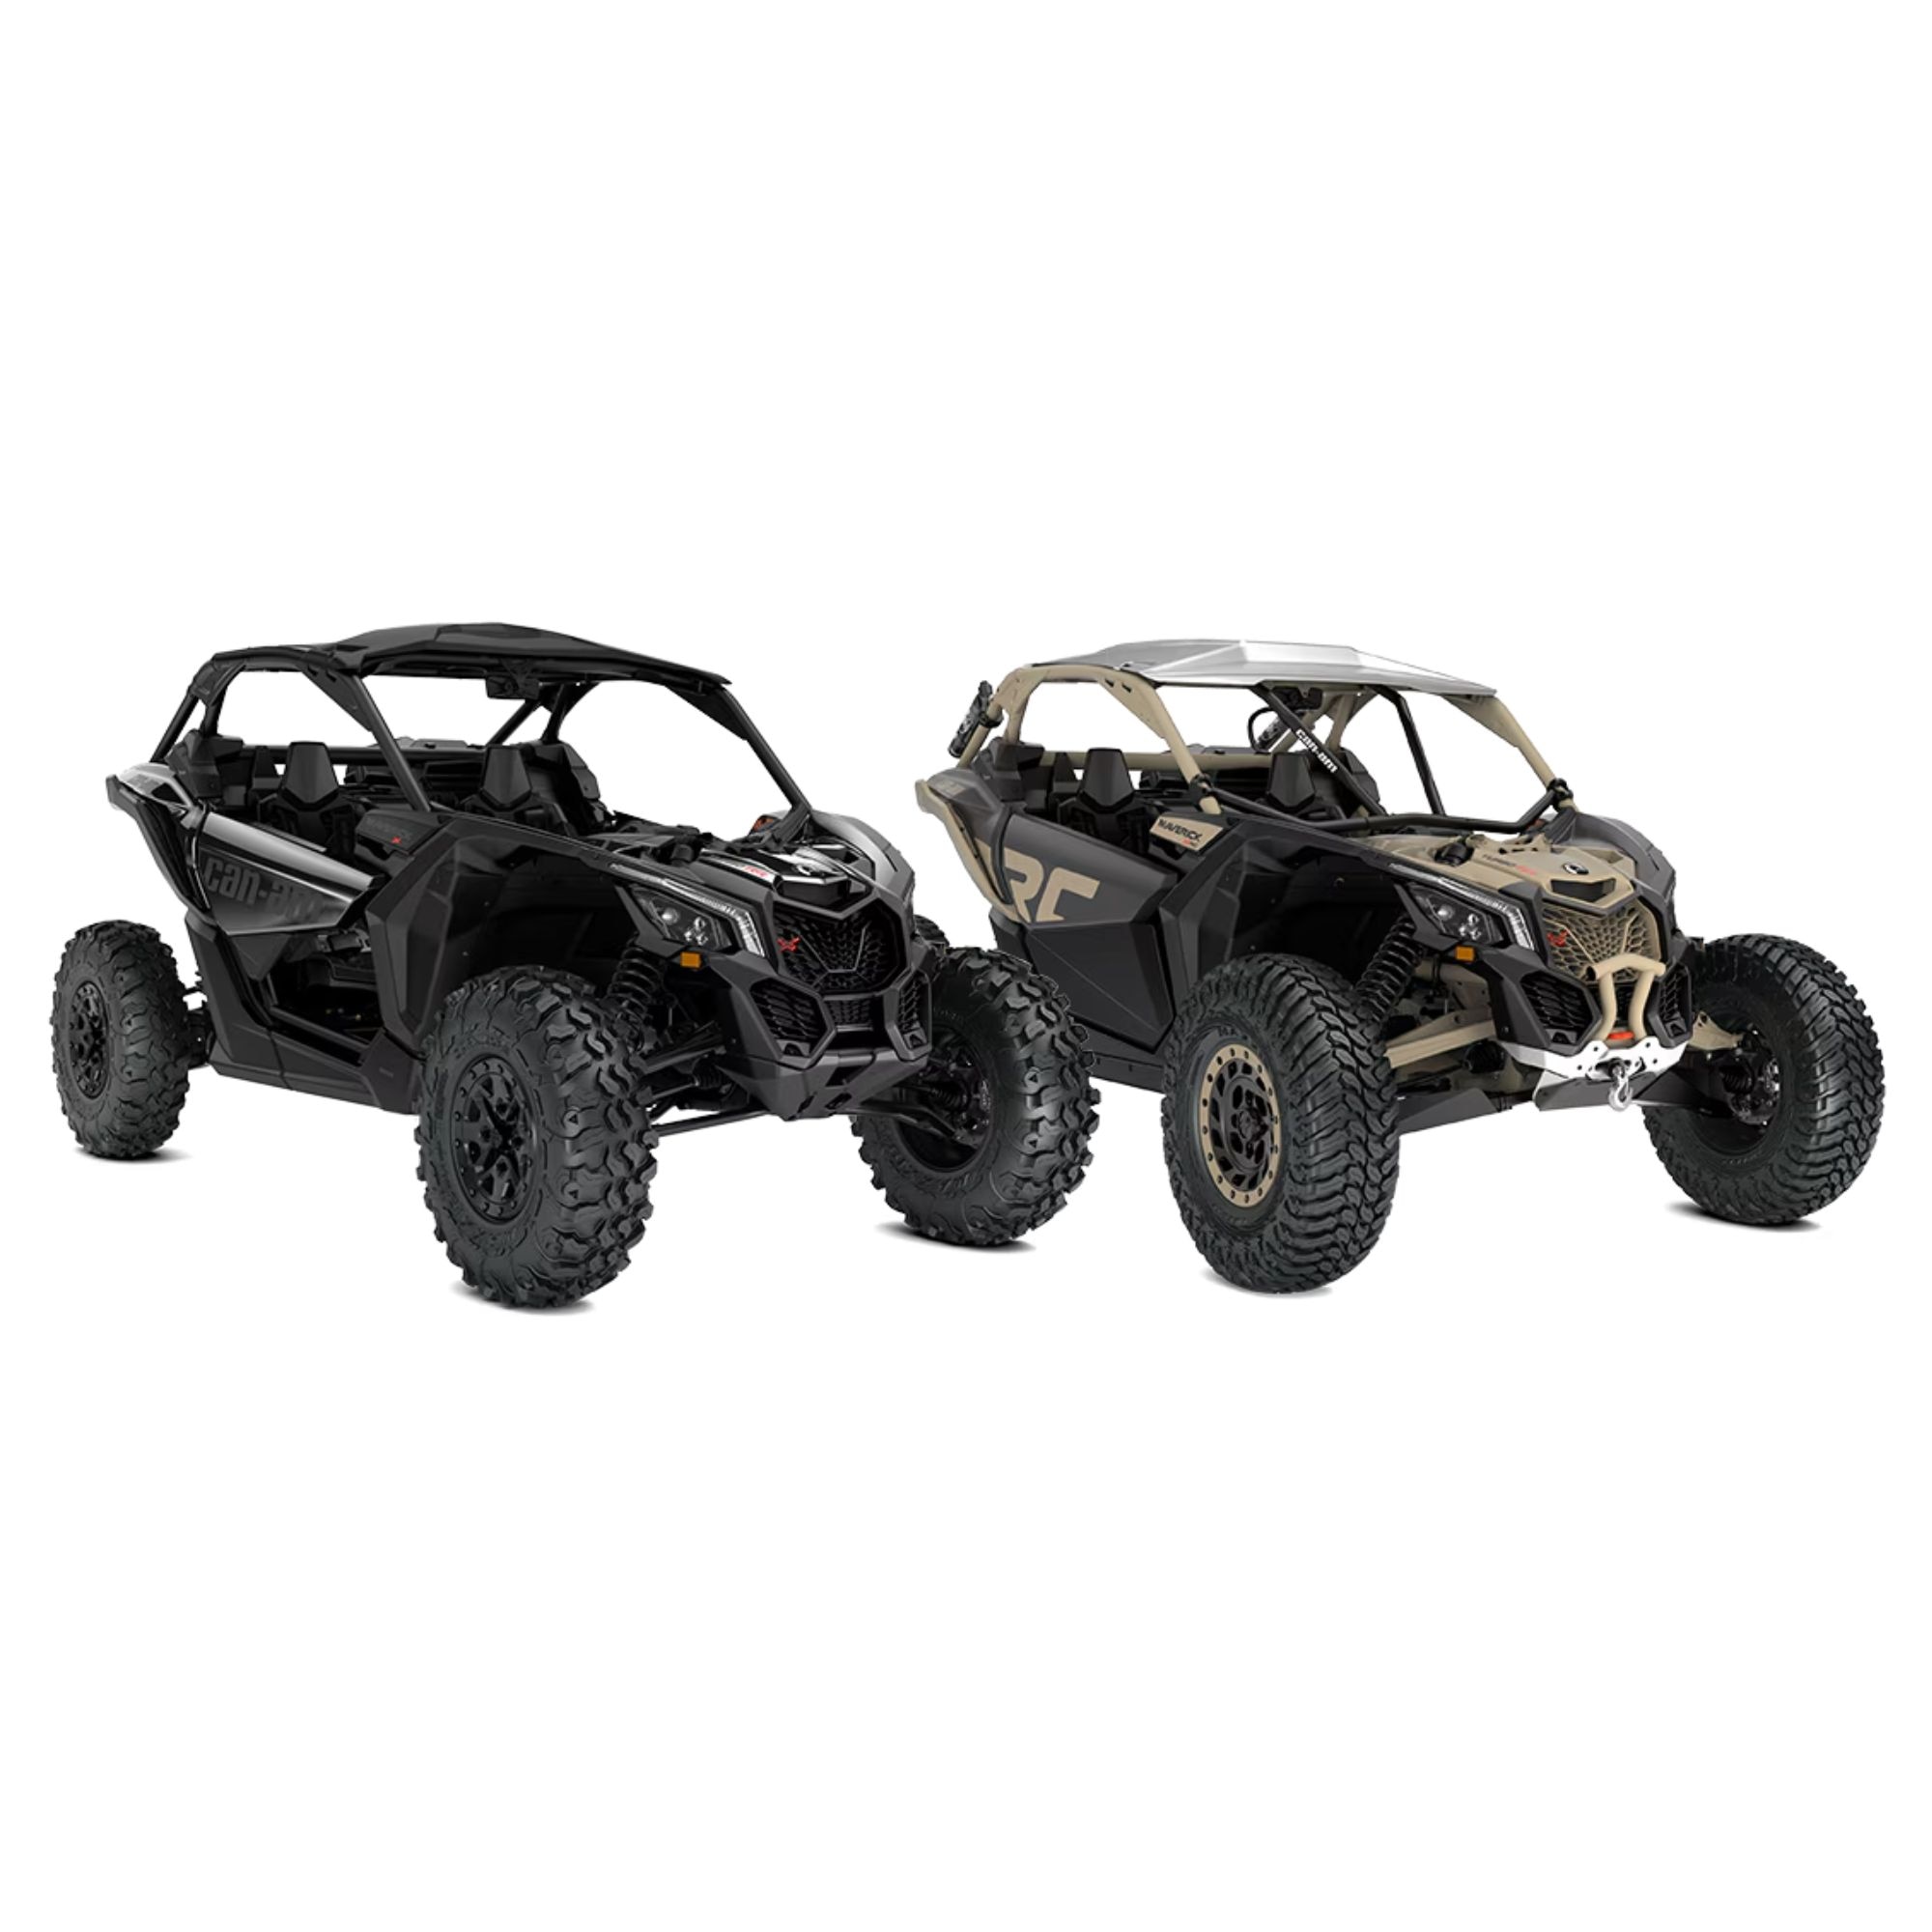 Two Can-Am Maverick X3s